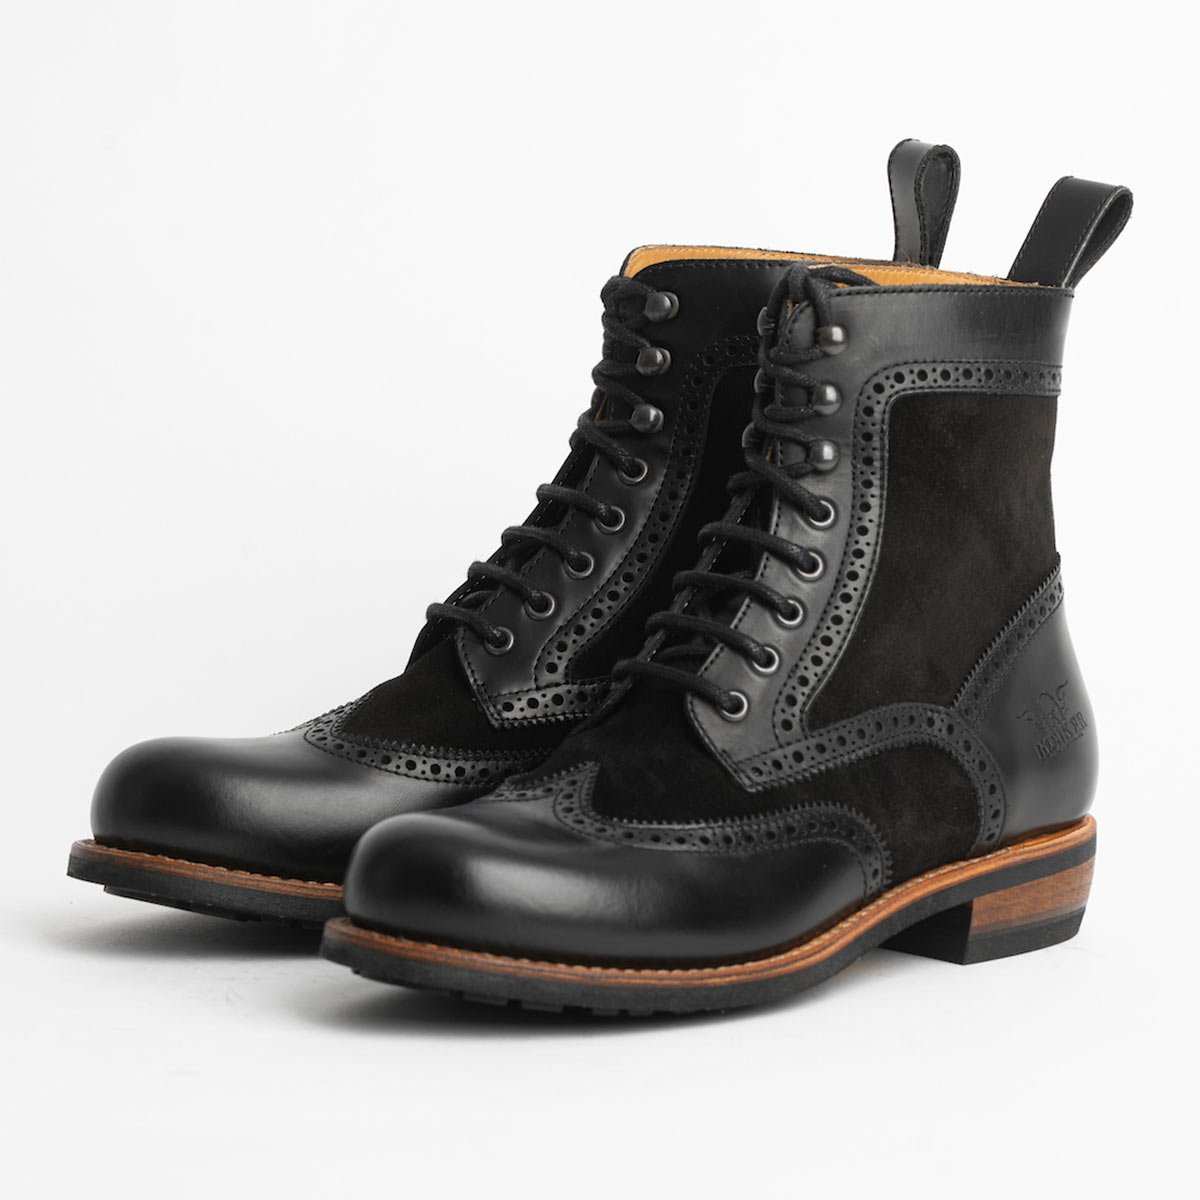 Rokker Frisco Brogue Boots by The Rokker Company